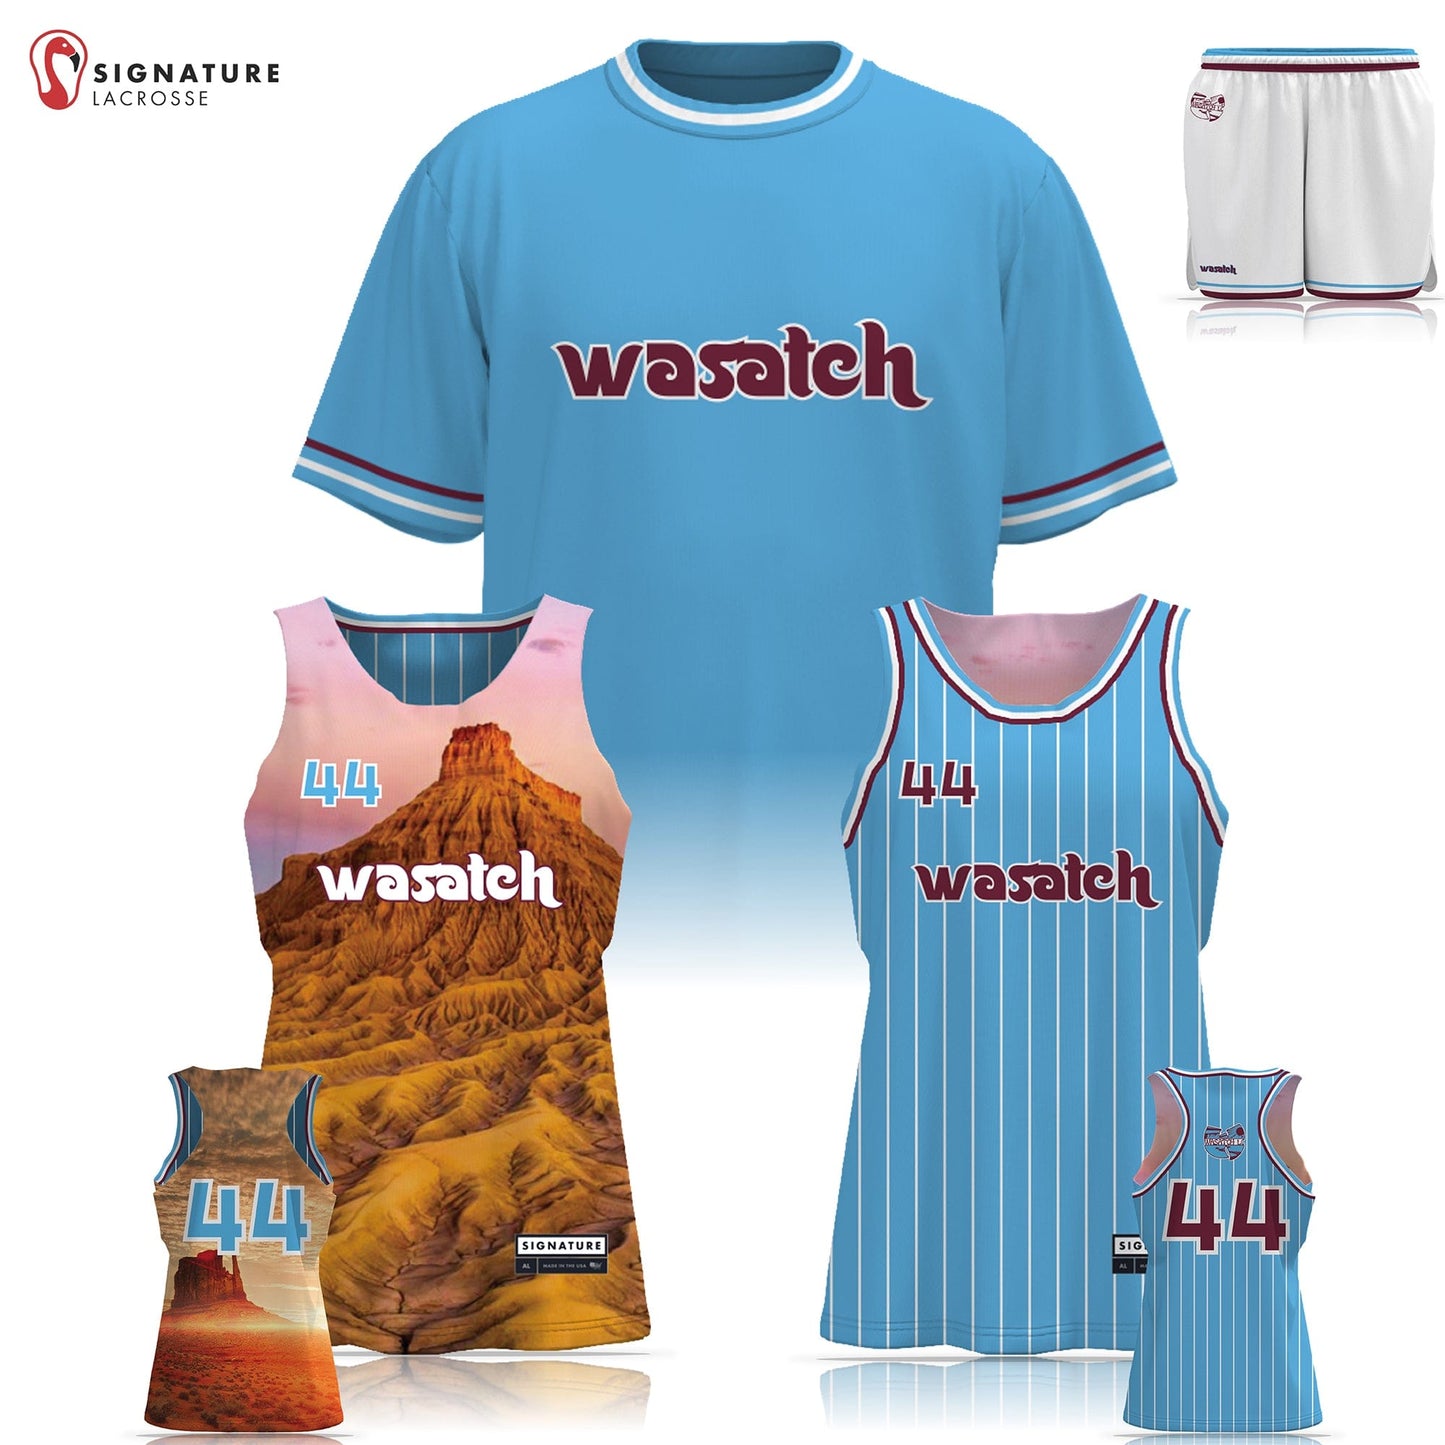 Wasatch Lacrosse Women's Performance 3 Piece Game Package:Girls '24/'25 Signature Lacrosse